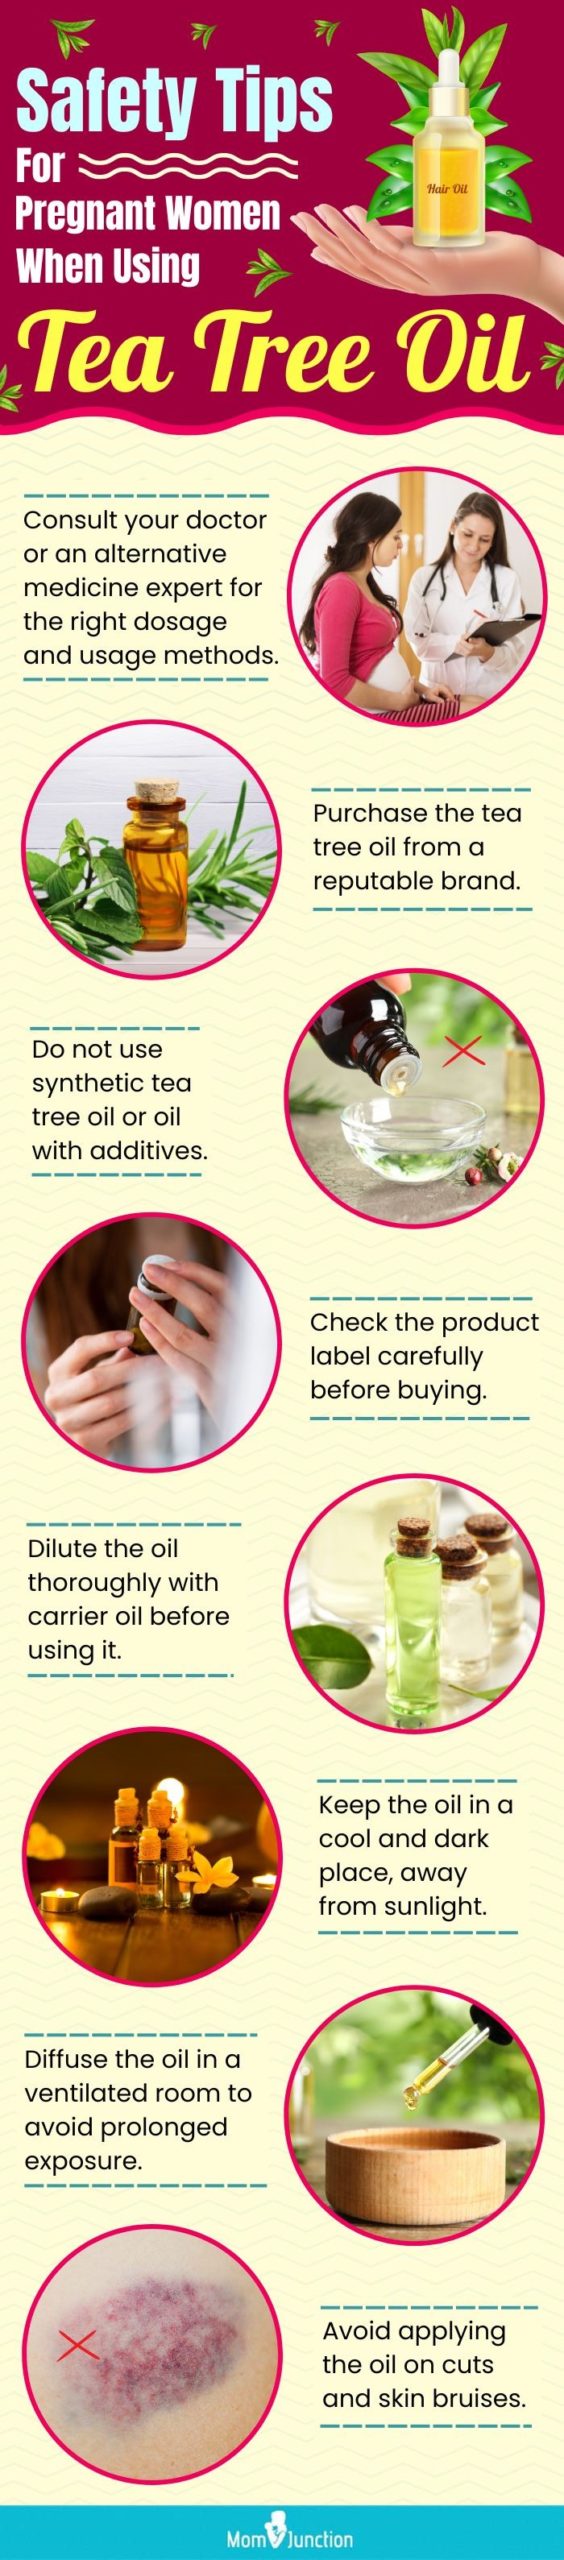 safety tips for pregnant women when using tea tree oil (infographic)